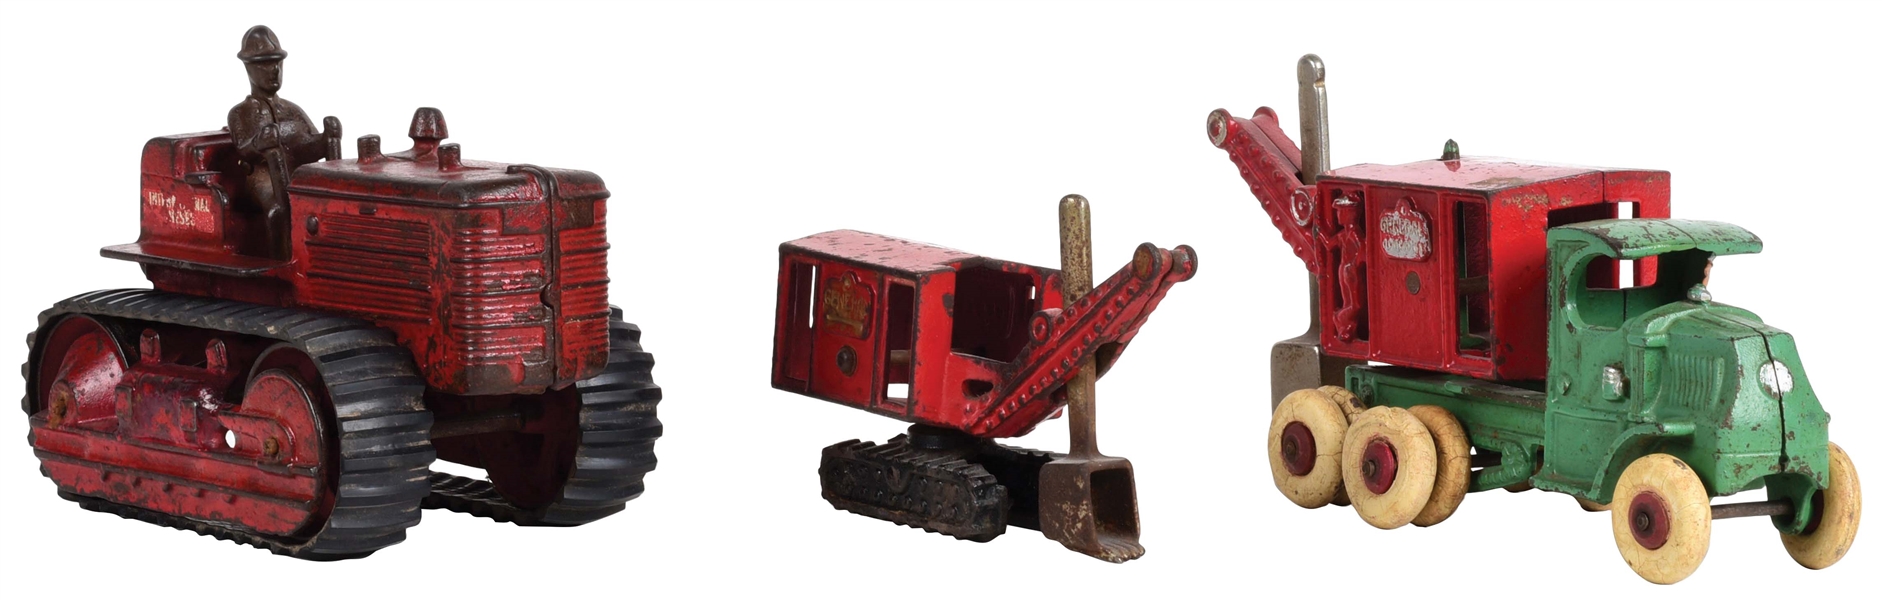 LOT OF 3: CONSTRUCTION VEHICLES.